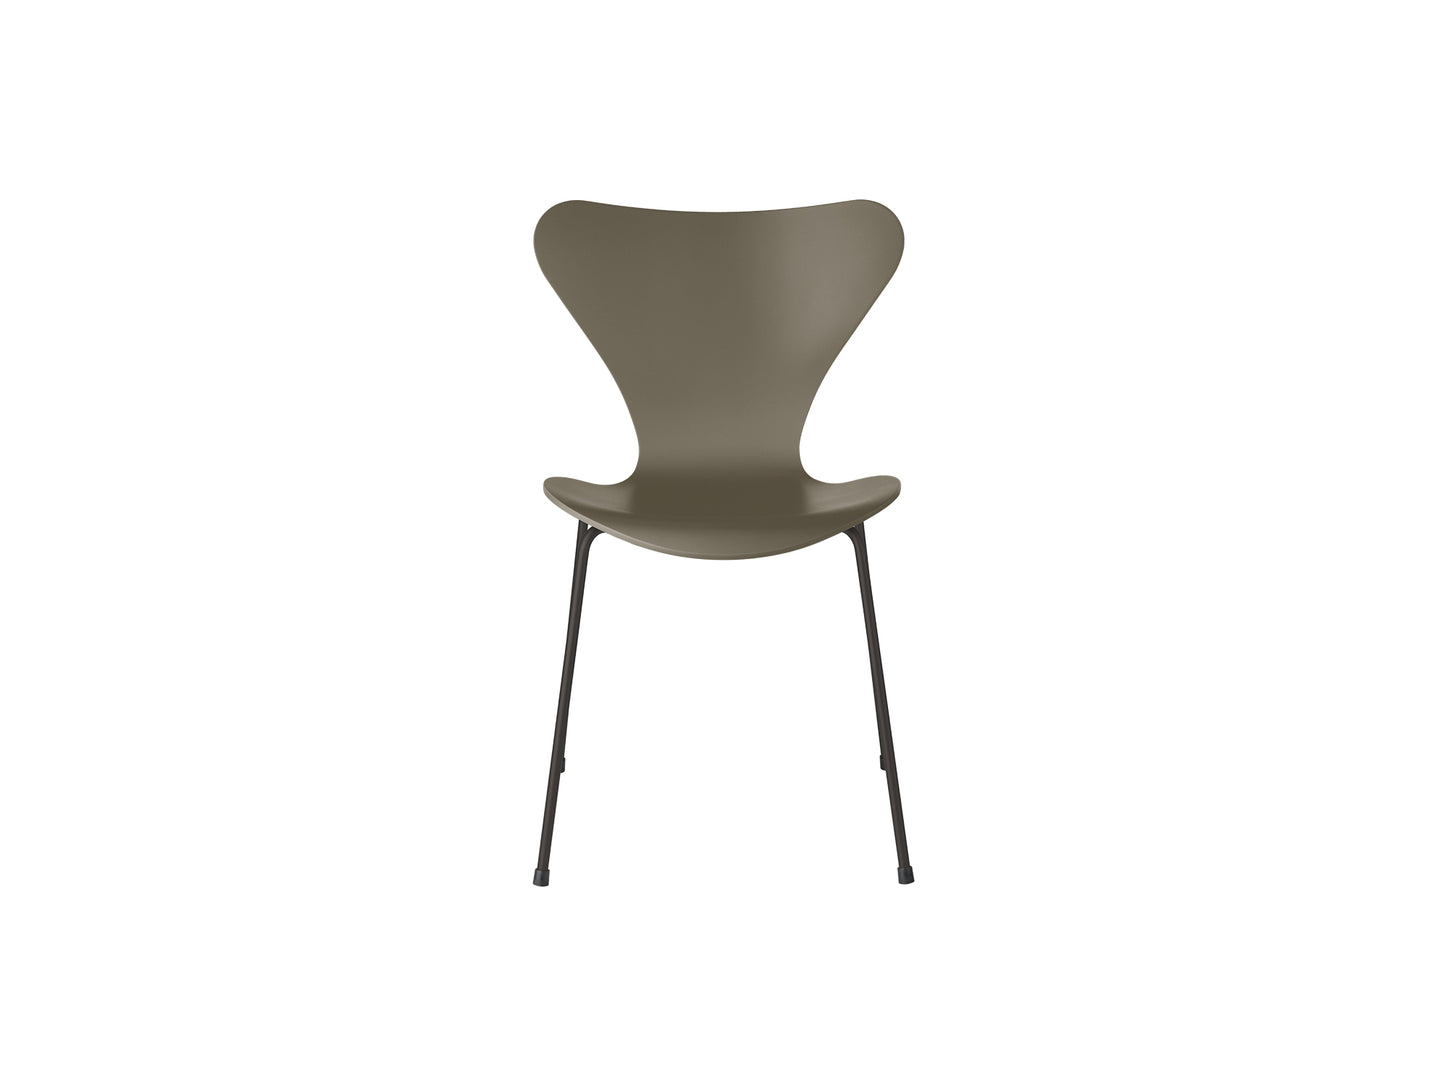 Series 7™ 3107 Dining Chair by Fritz Hansen - Olive Green Lacquered Veneer Shell / Warm Graphite Steel